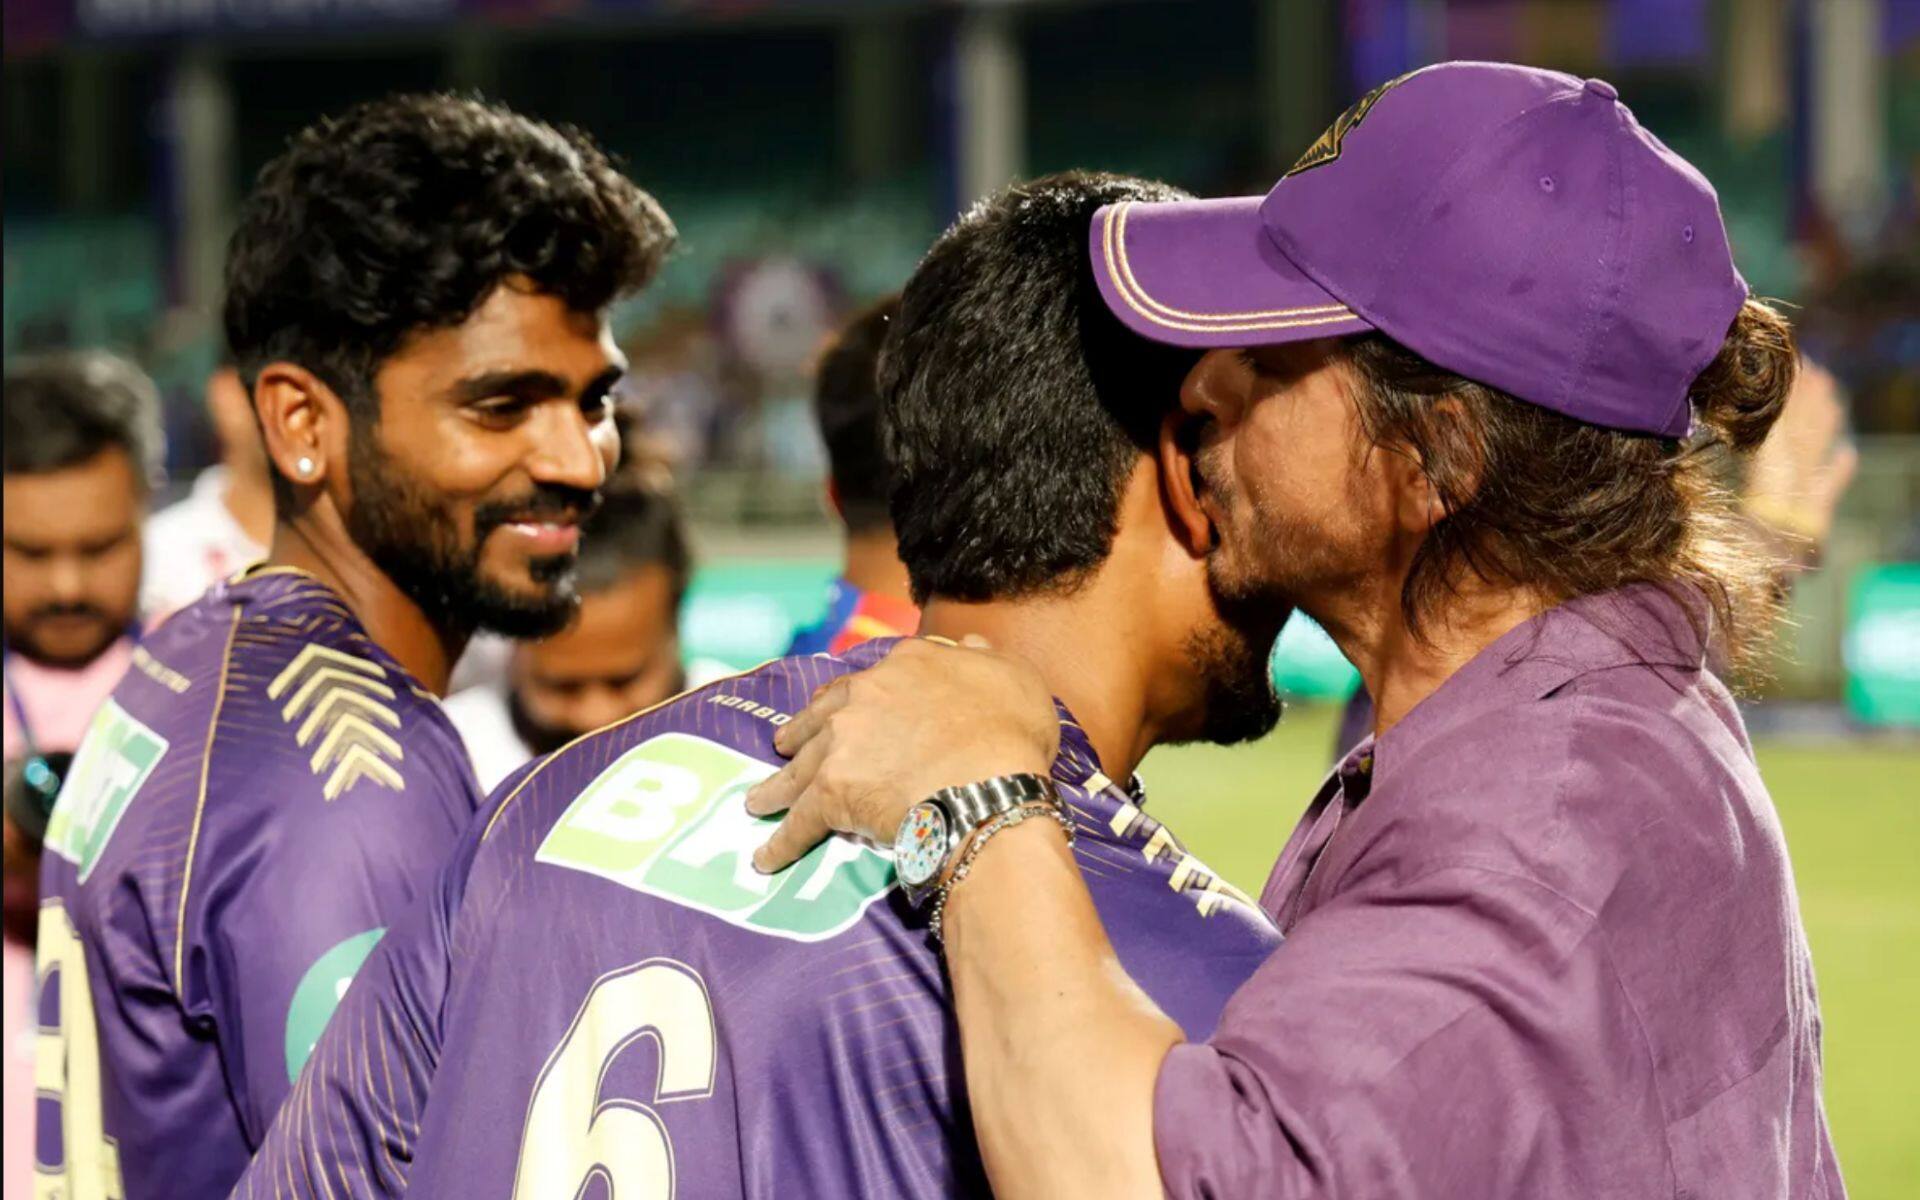 Shah Rukh Khan with one of KKR's youngsters after DC win (AP)